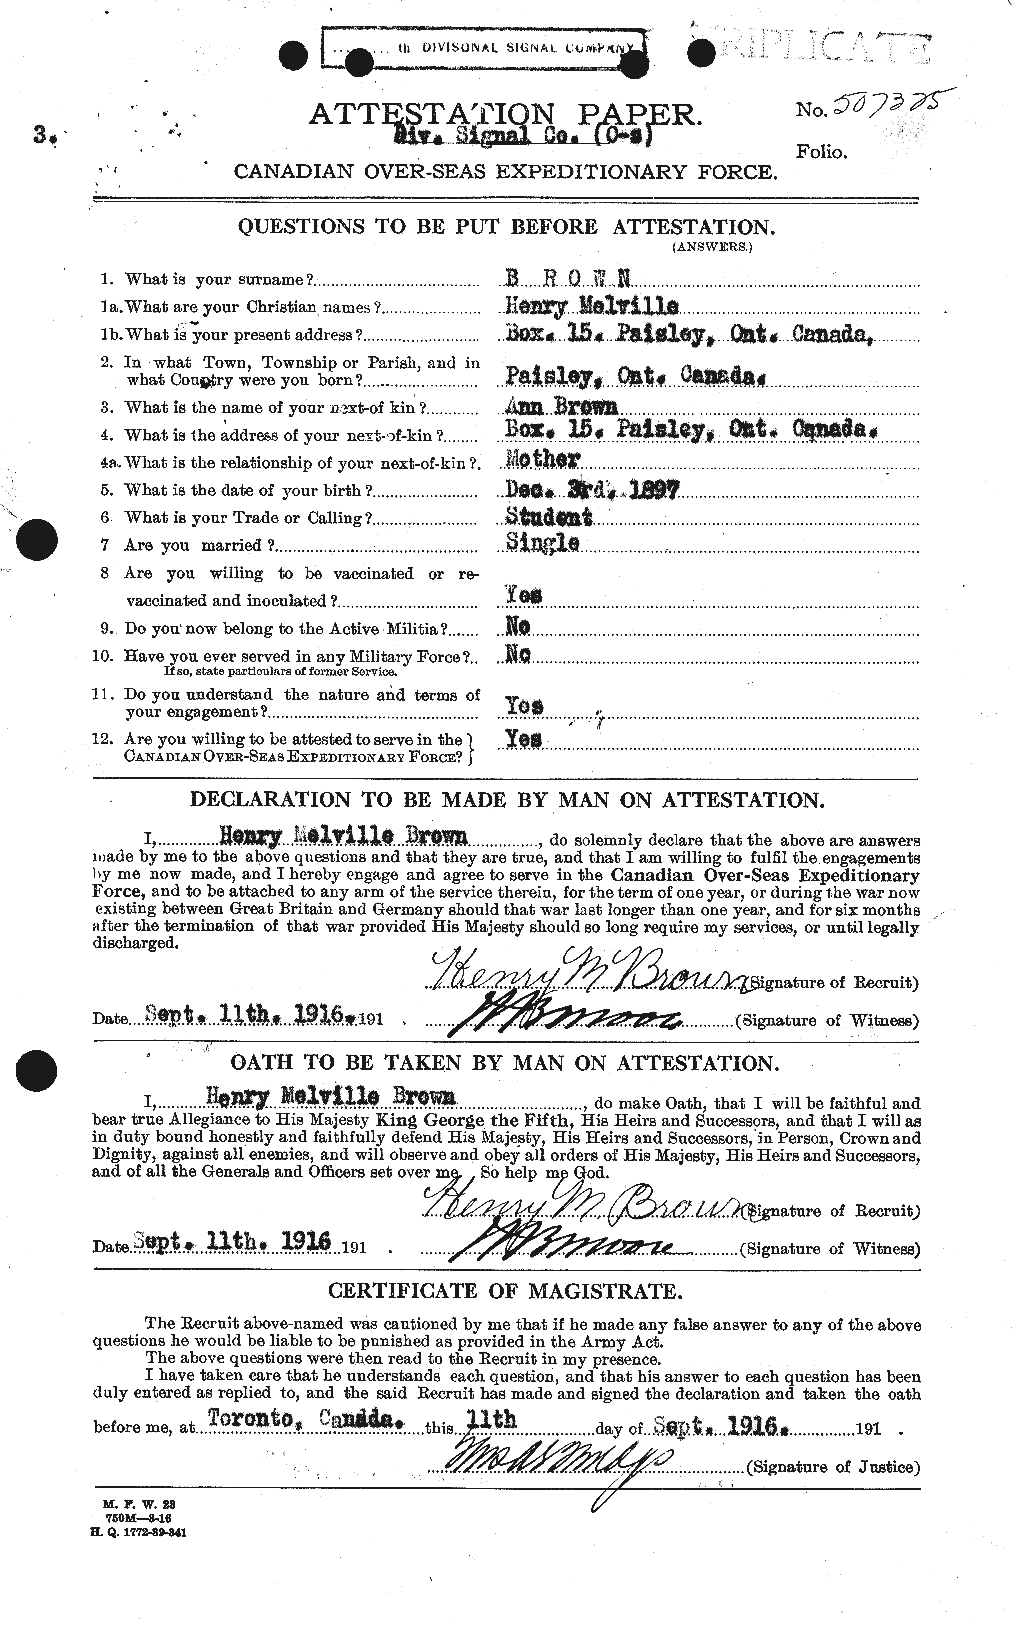 Personnel Records of the First World War - CEF 265534a